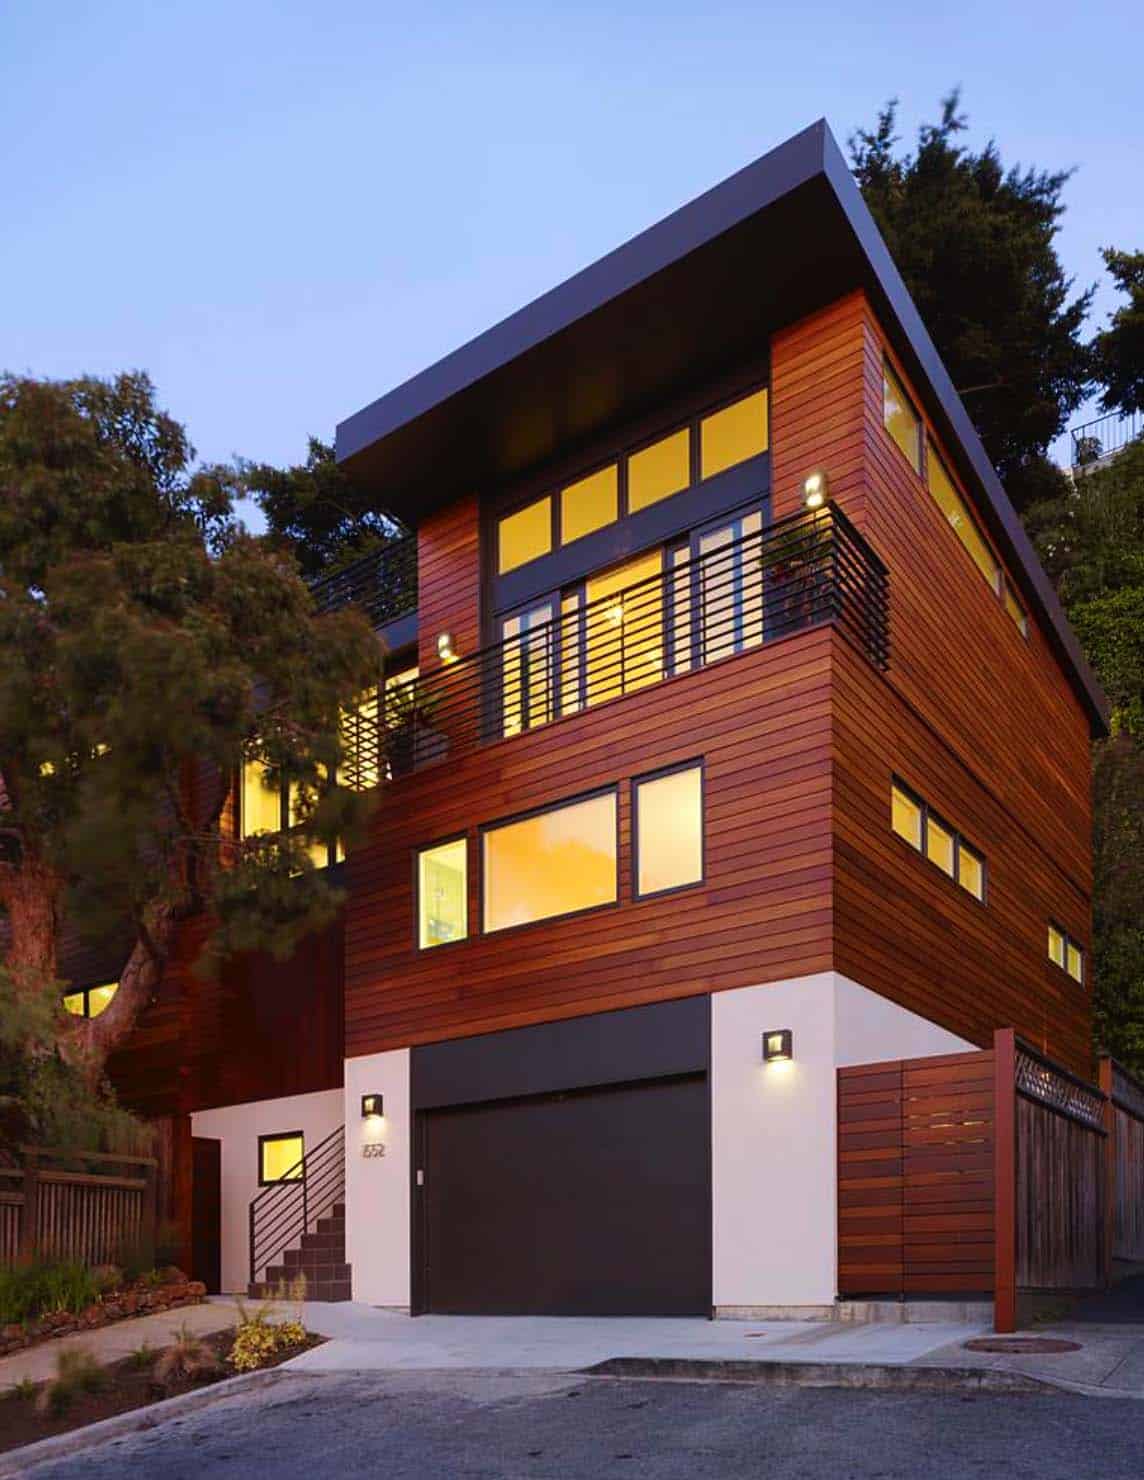 Beautiful home nestled into the hillside of Cole Valley, California